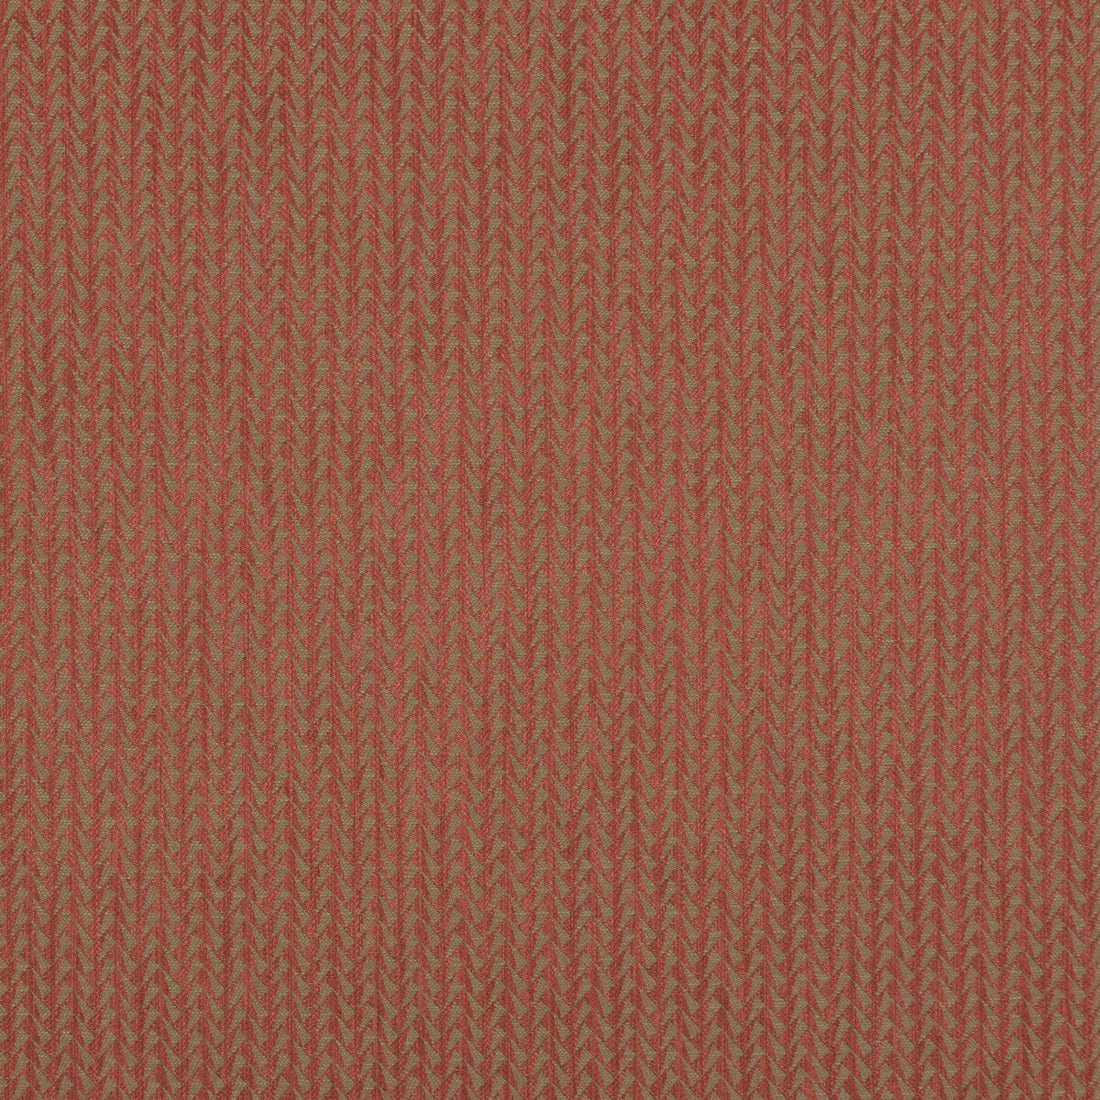 Axis fabric in red/bronze color - pattern BF10679.450.0 - by G P &amp; J Baker in the Essential Colours collection